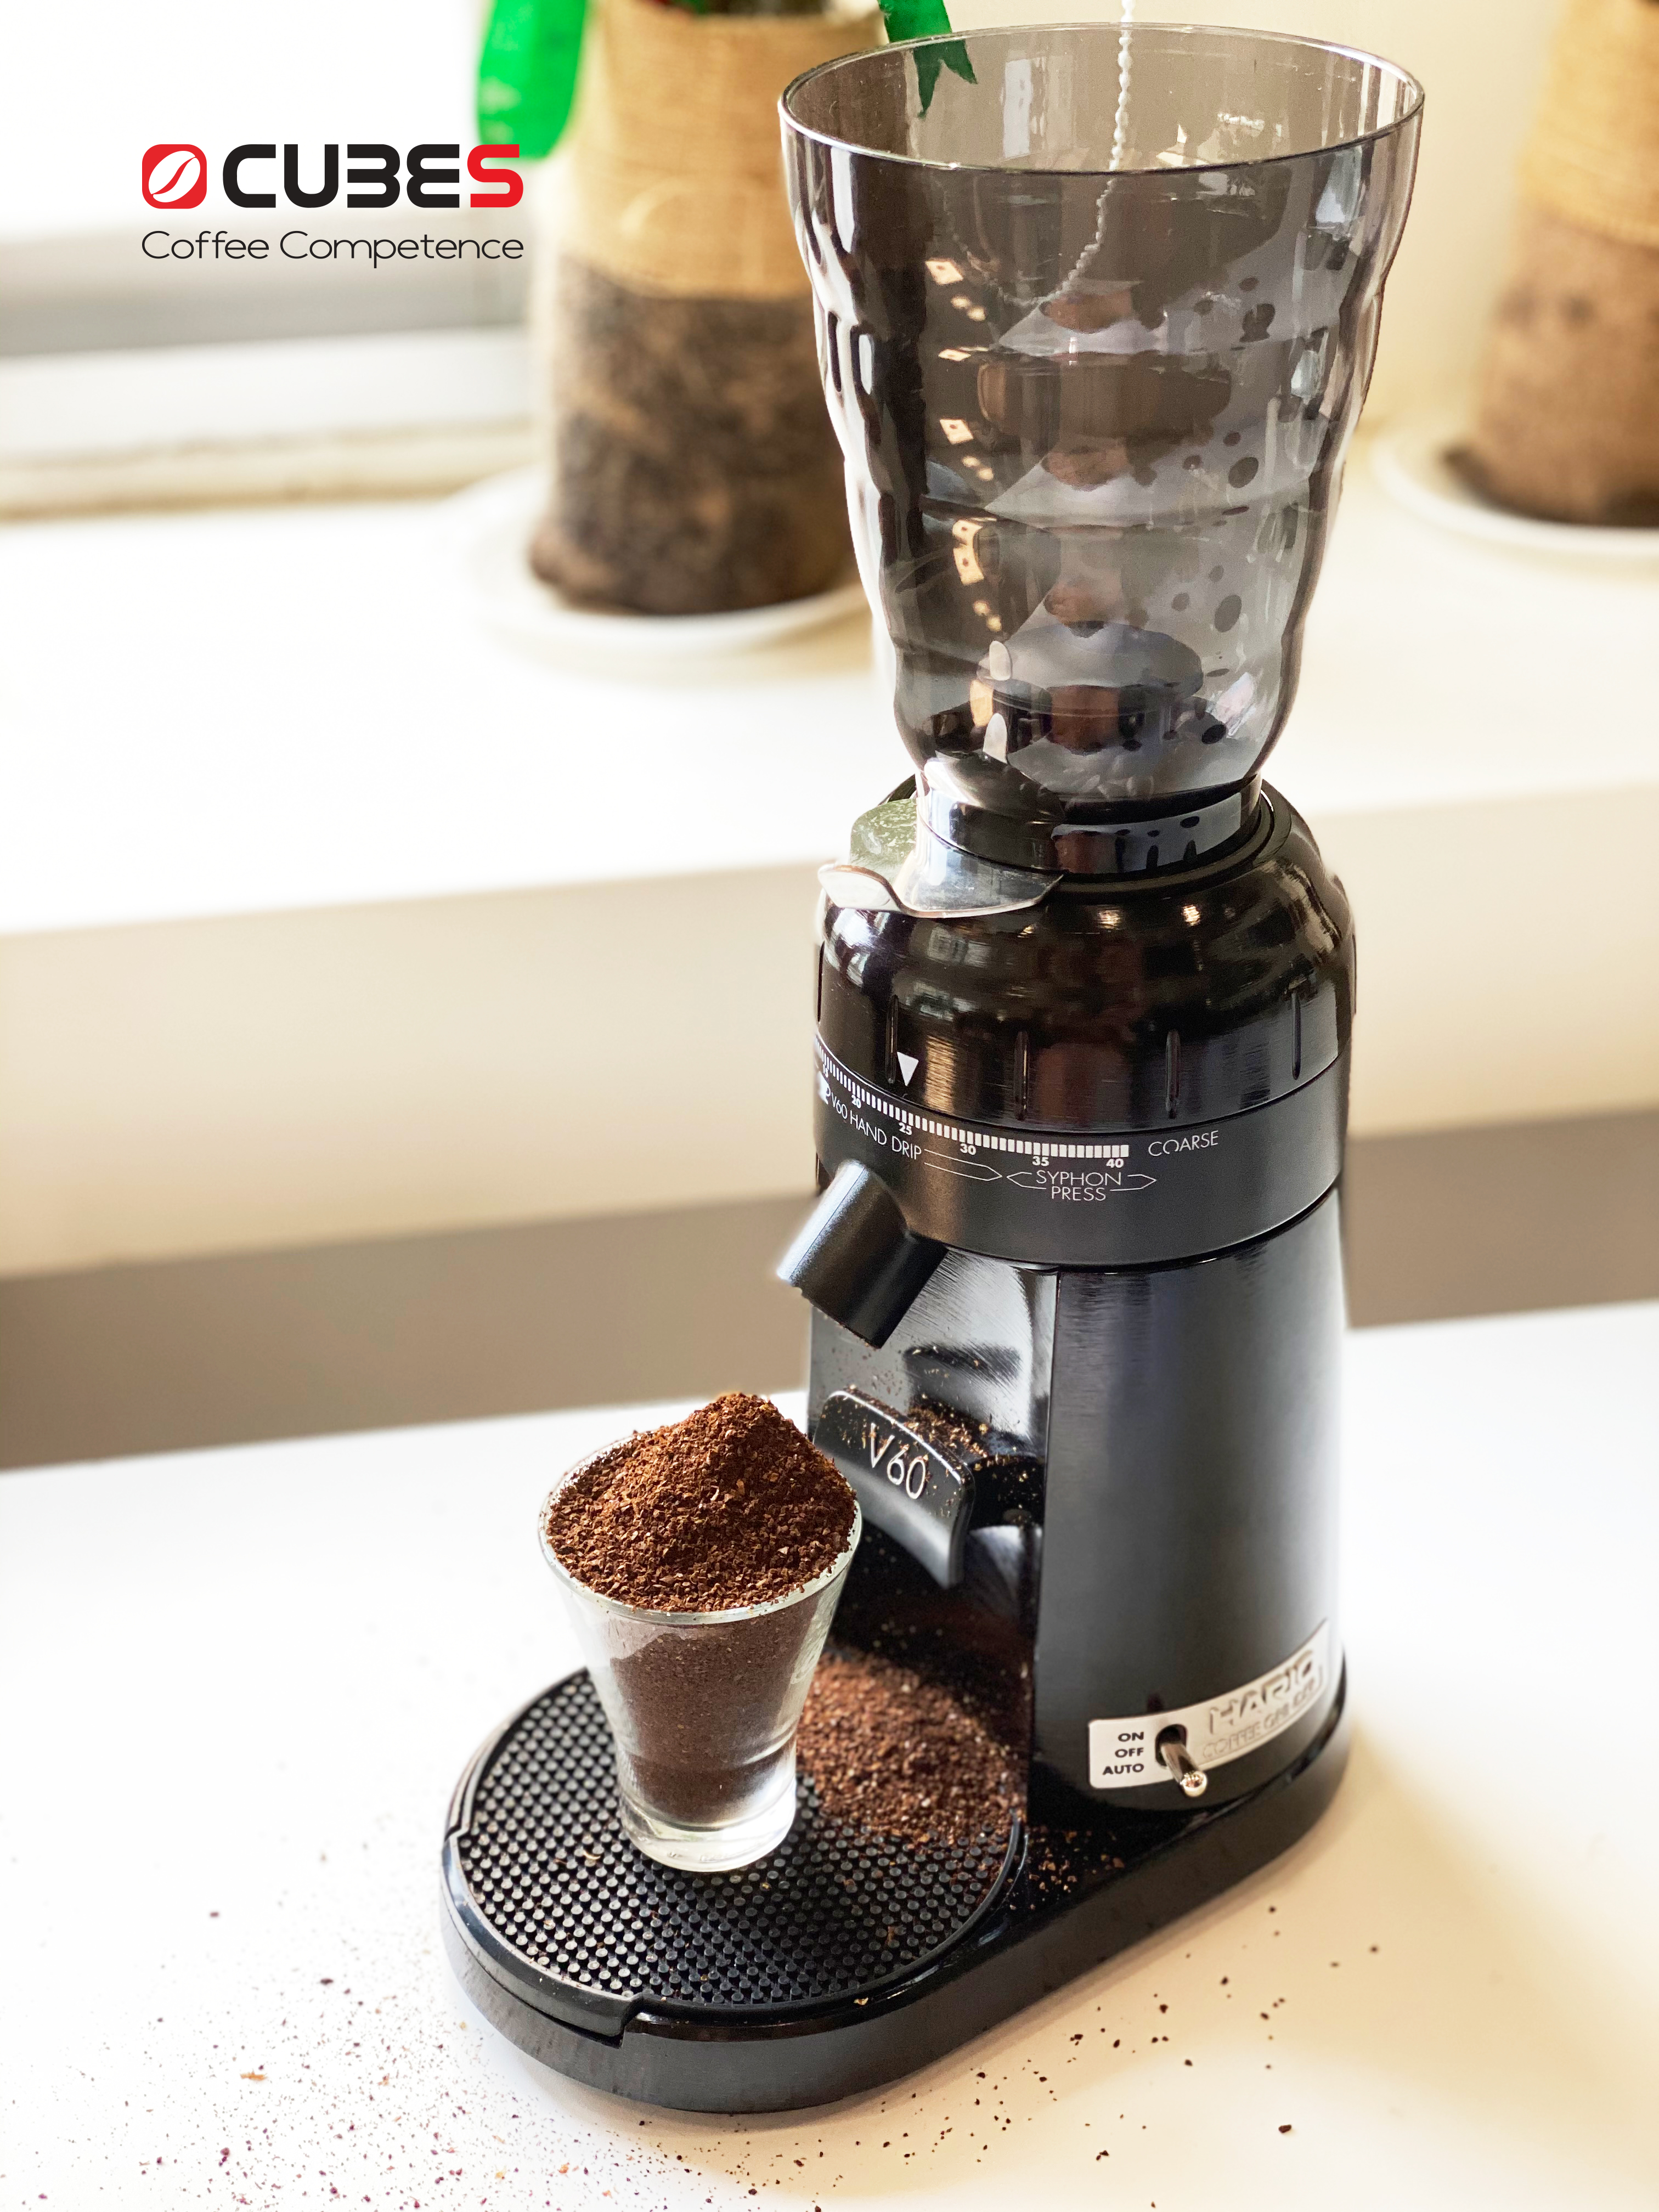 What makes HARIO V60 a must-have coffee grinder?